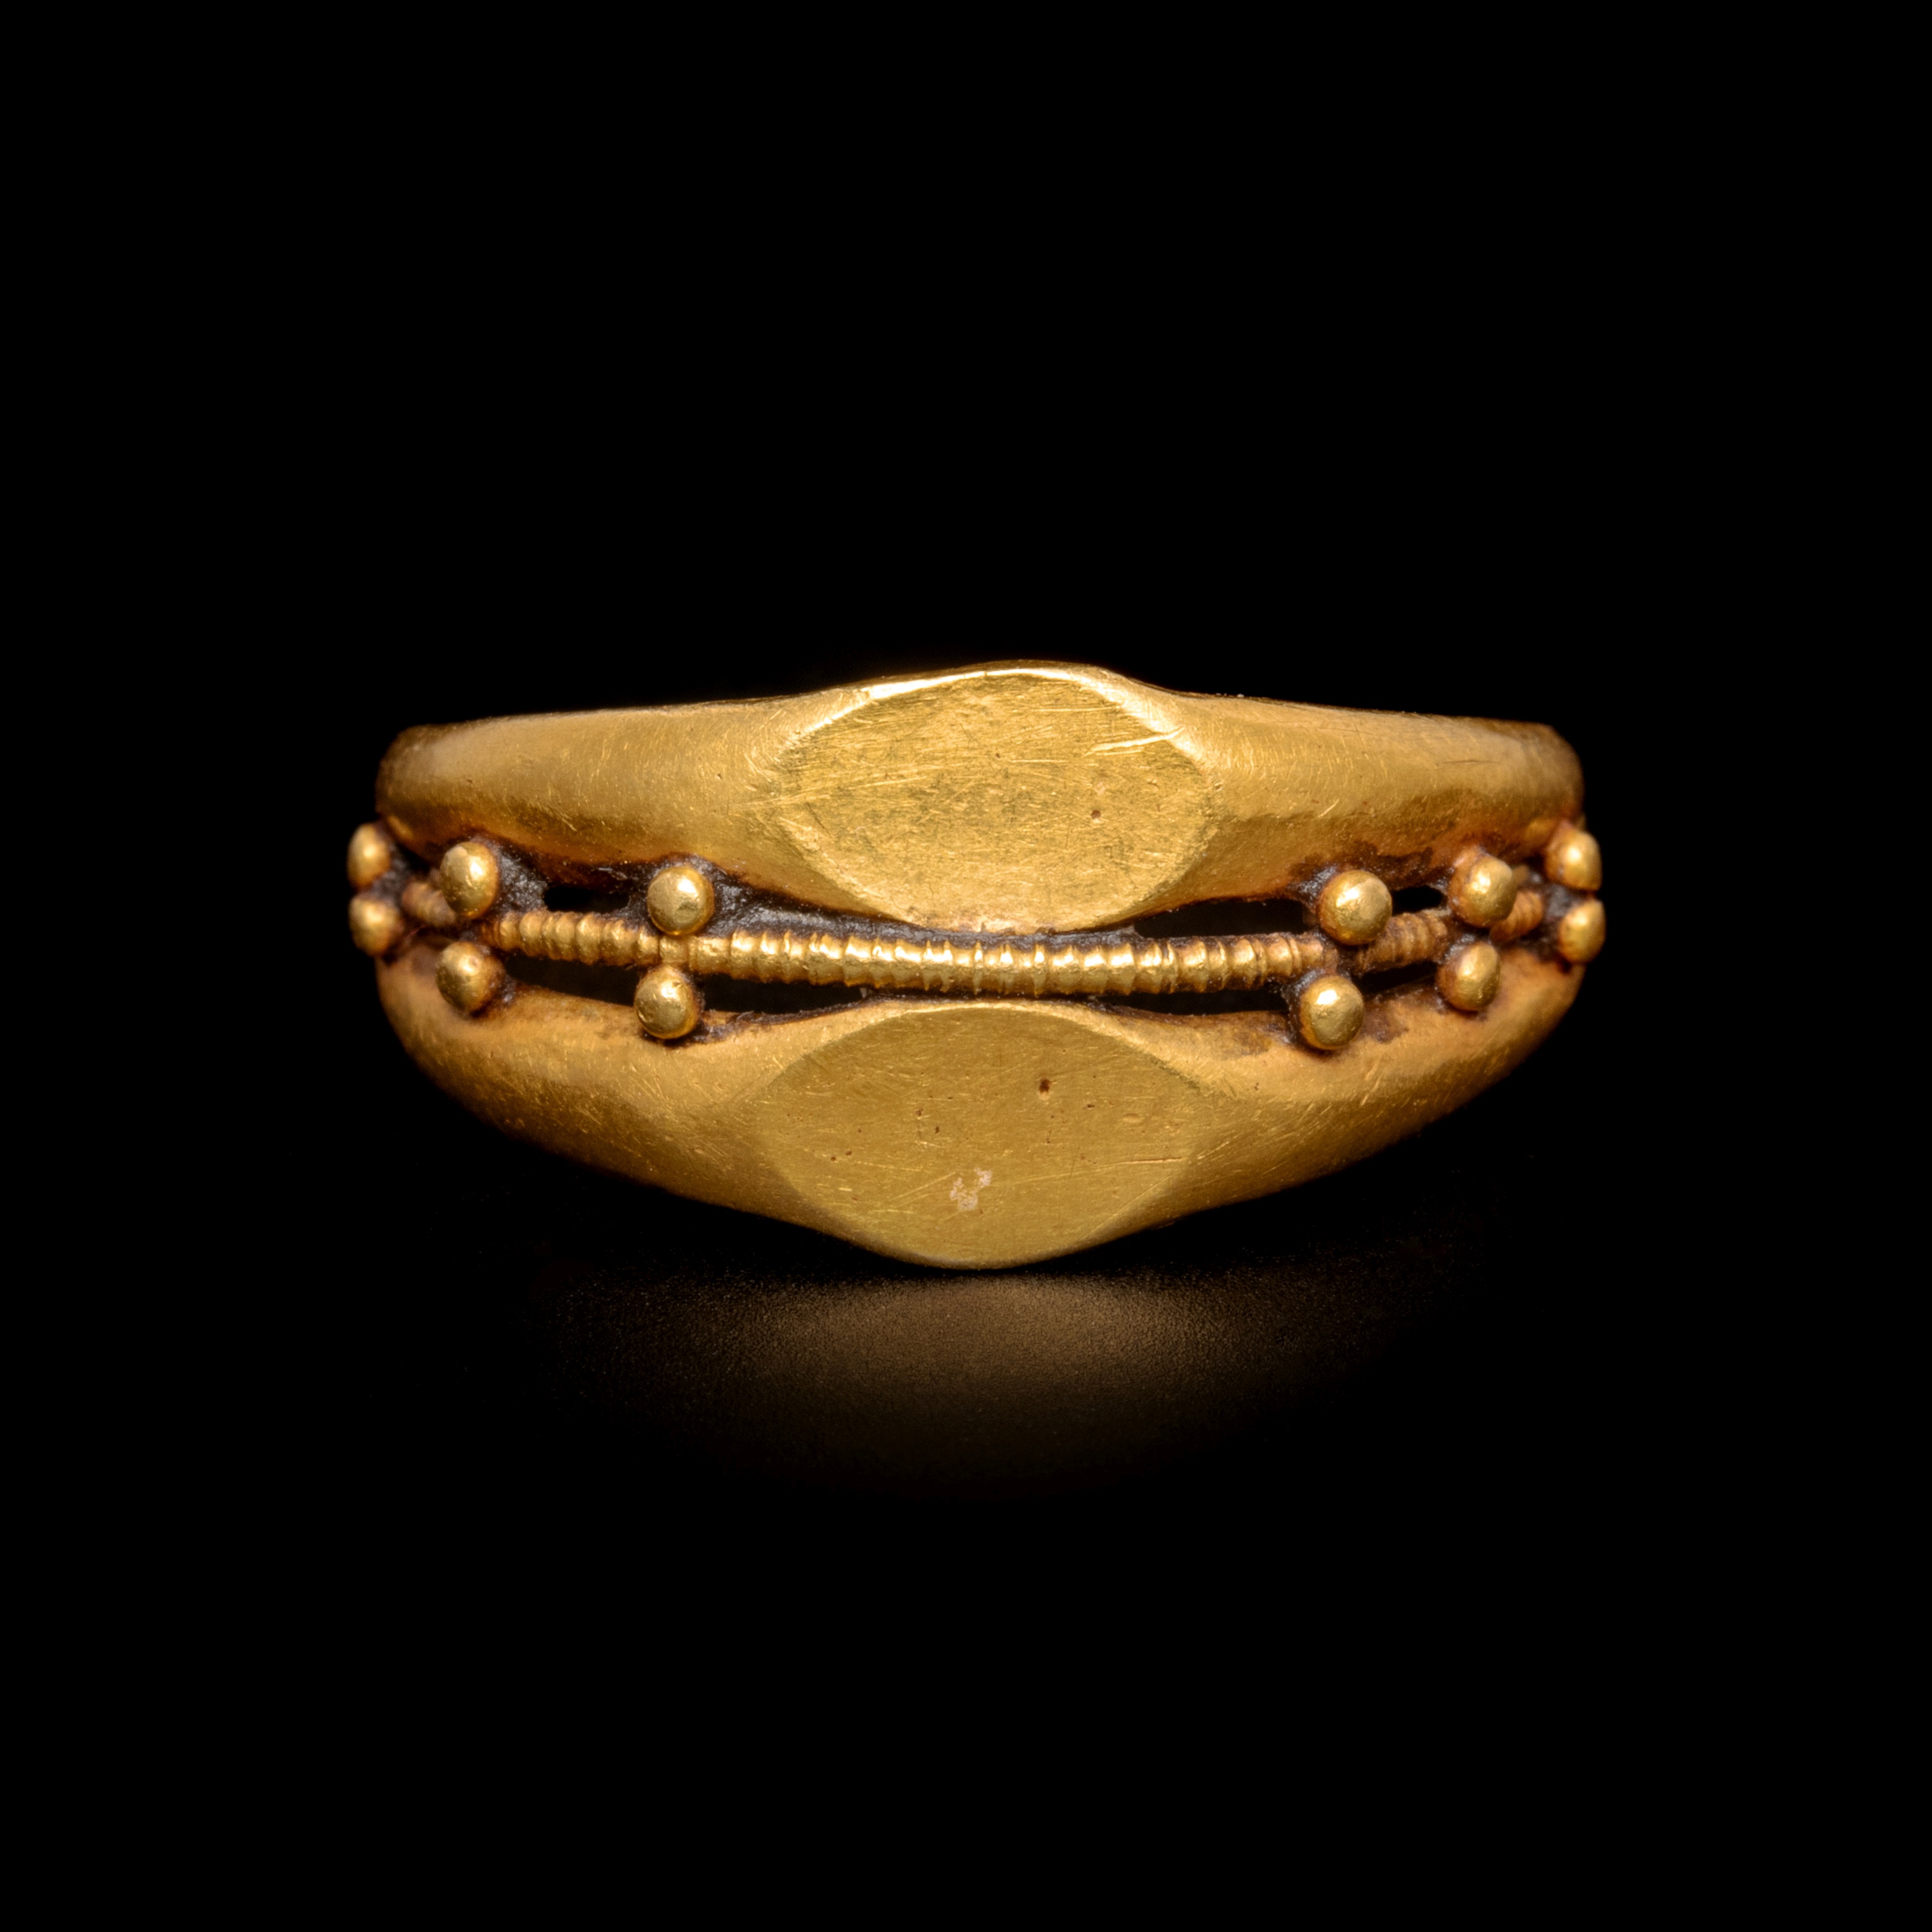 A Roman Gold Double Finger Ring Ring size 3 3/4; Diameter 5/8 inch (1.5 cm). - Image 2 of 2